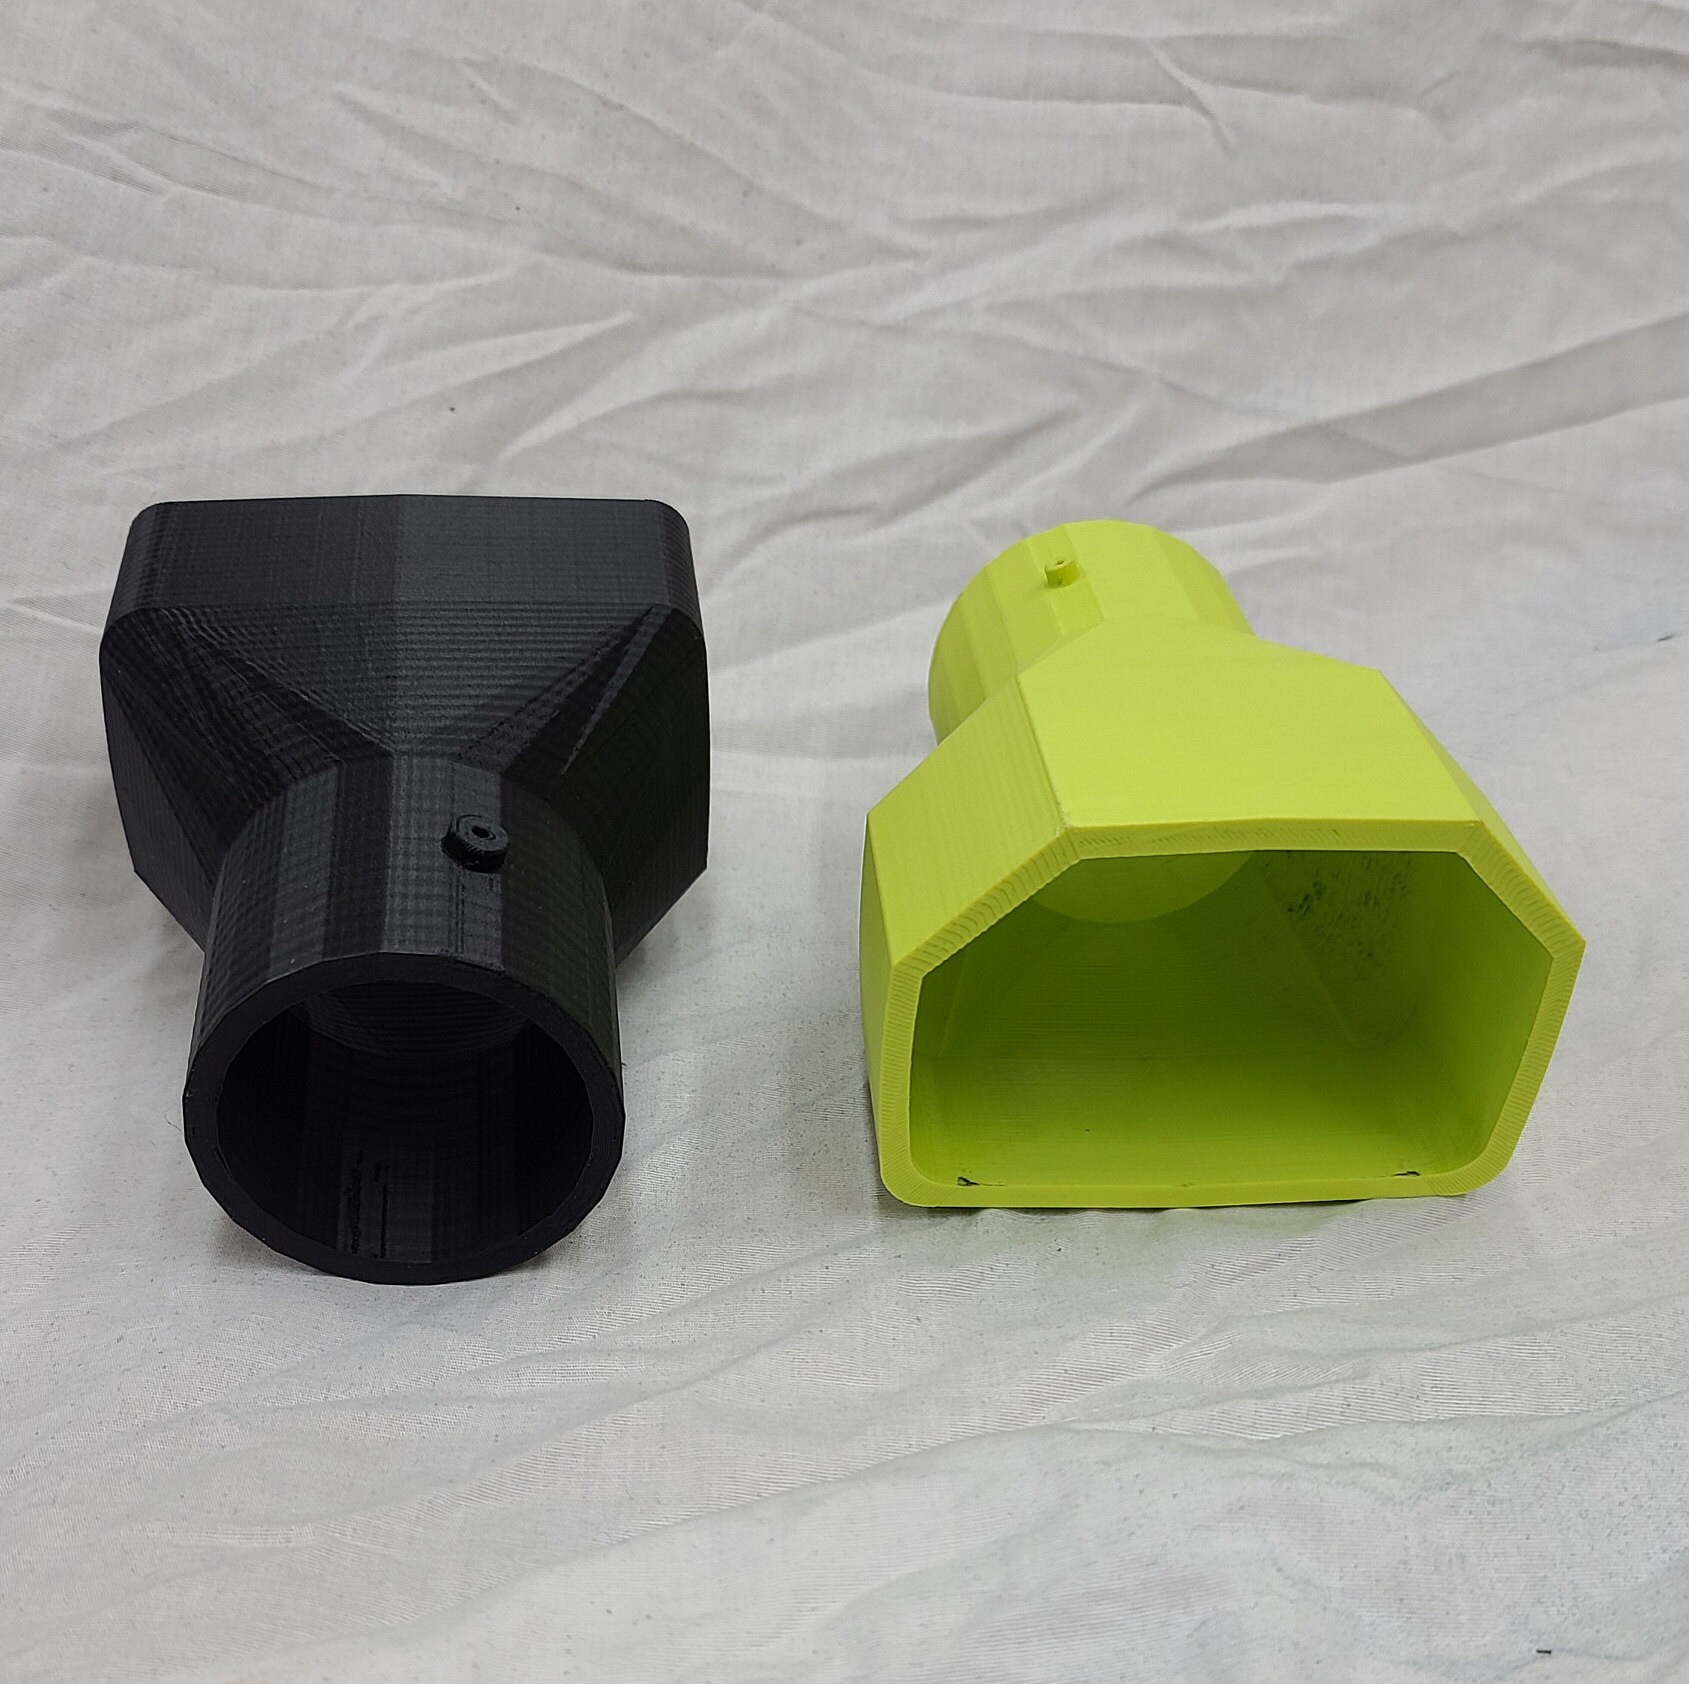 3D Printed Adapter for the Worx Leaf Pro Collection System, Ryobi Leaf  Vacuum and Mulcher